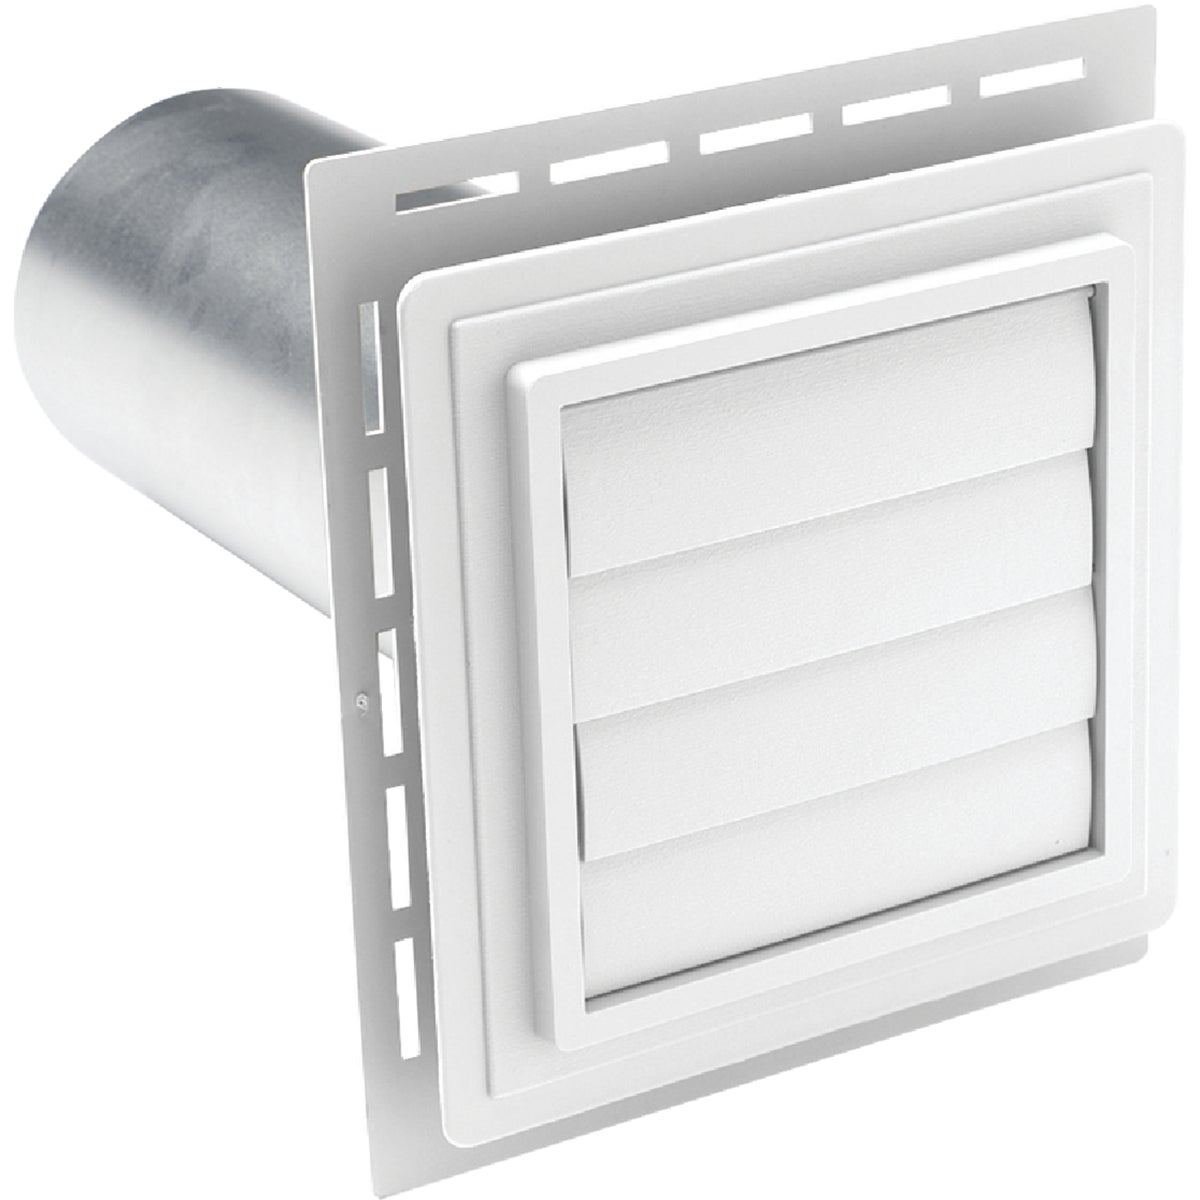 Item 107719, The louvered exhaust vent is used to vent dryers and bathroom exhaust fans